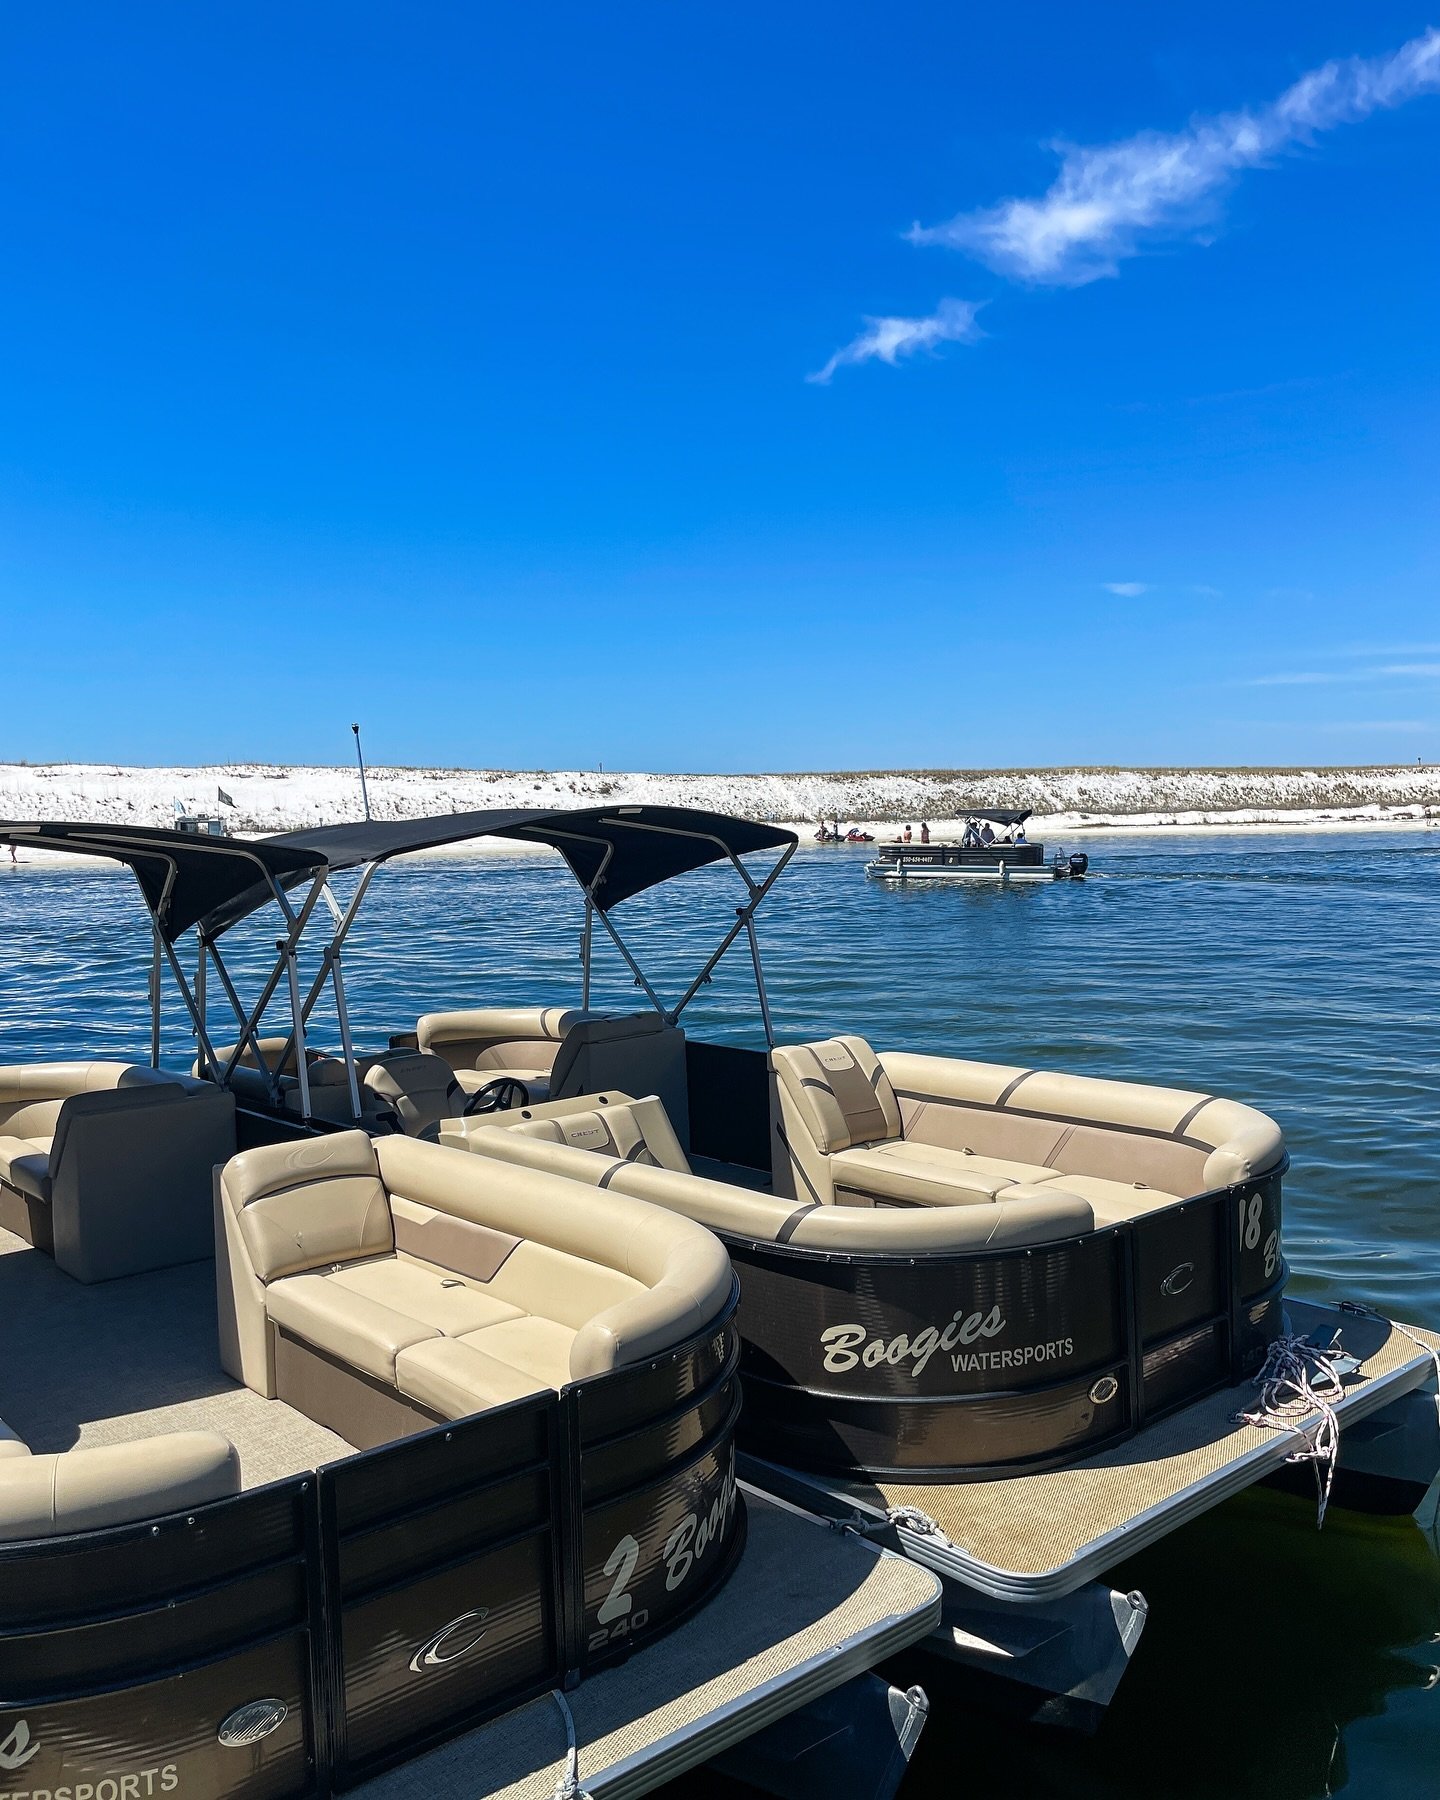 🌅 April vibes are in the air, and the water is calling your name! Don&rsquo;t let the month slip away without experiencing the exhilaration of a pontoon boat ride. 🛥️&zwj;💨

🔗 Reserve your boat via link in bio or call (850) 654-4497 to book! 📞

